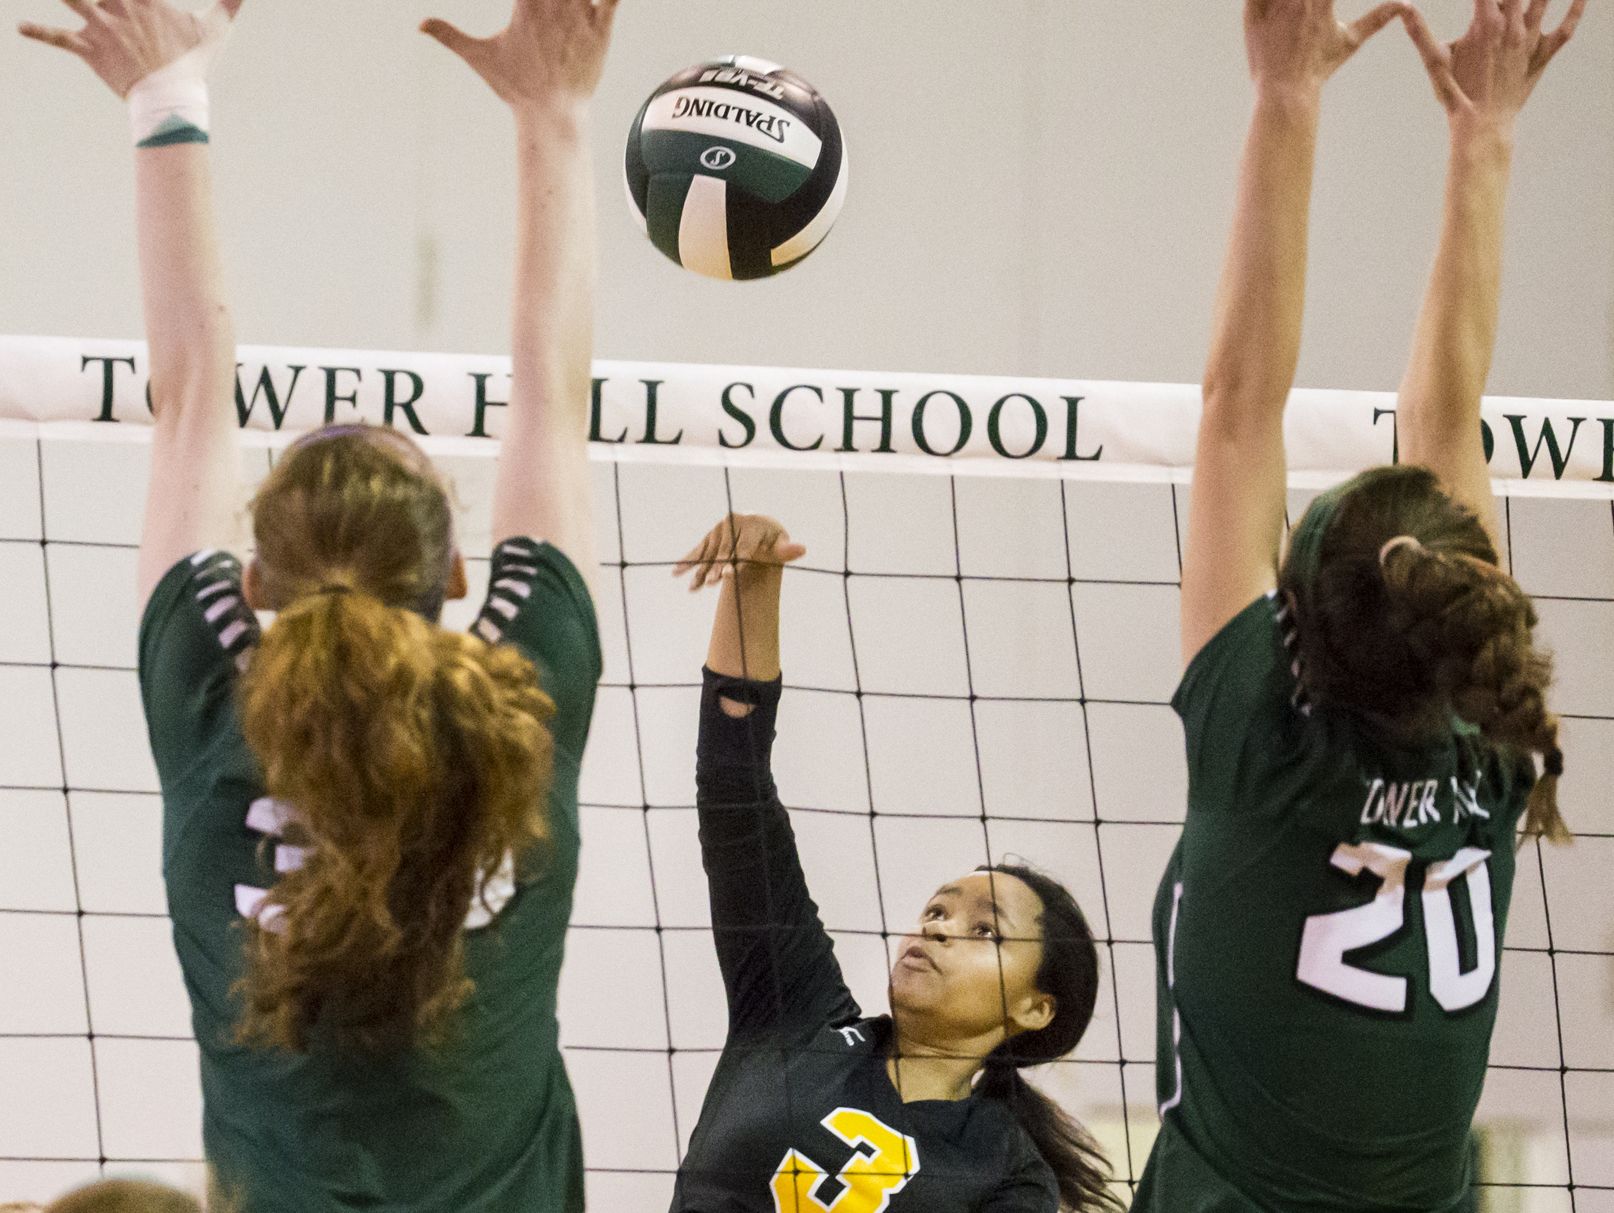 Tower Hill's Leslie Butler (No. 3) puts the ball over the net as Tower Hill's Josephine Thrasher (No. 38) and Marie Freebery (No. 20) leap for a block in the second game of Tower Hill's 3-0 win over Tatnall at Tower Hill School in Wilmington on Tuesday afternoon.